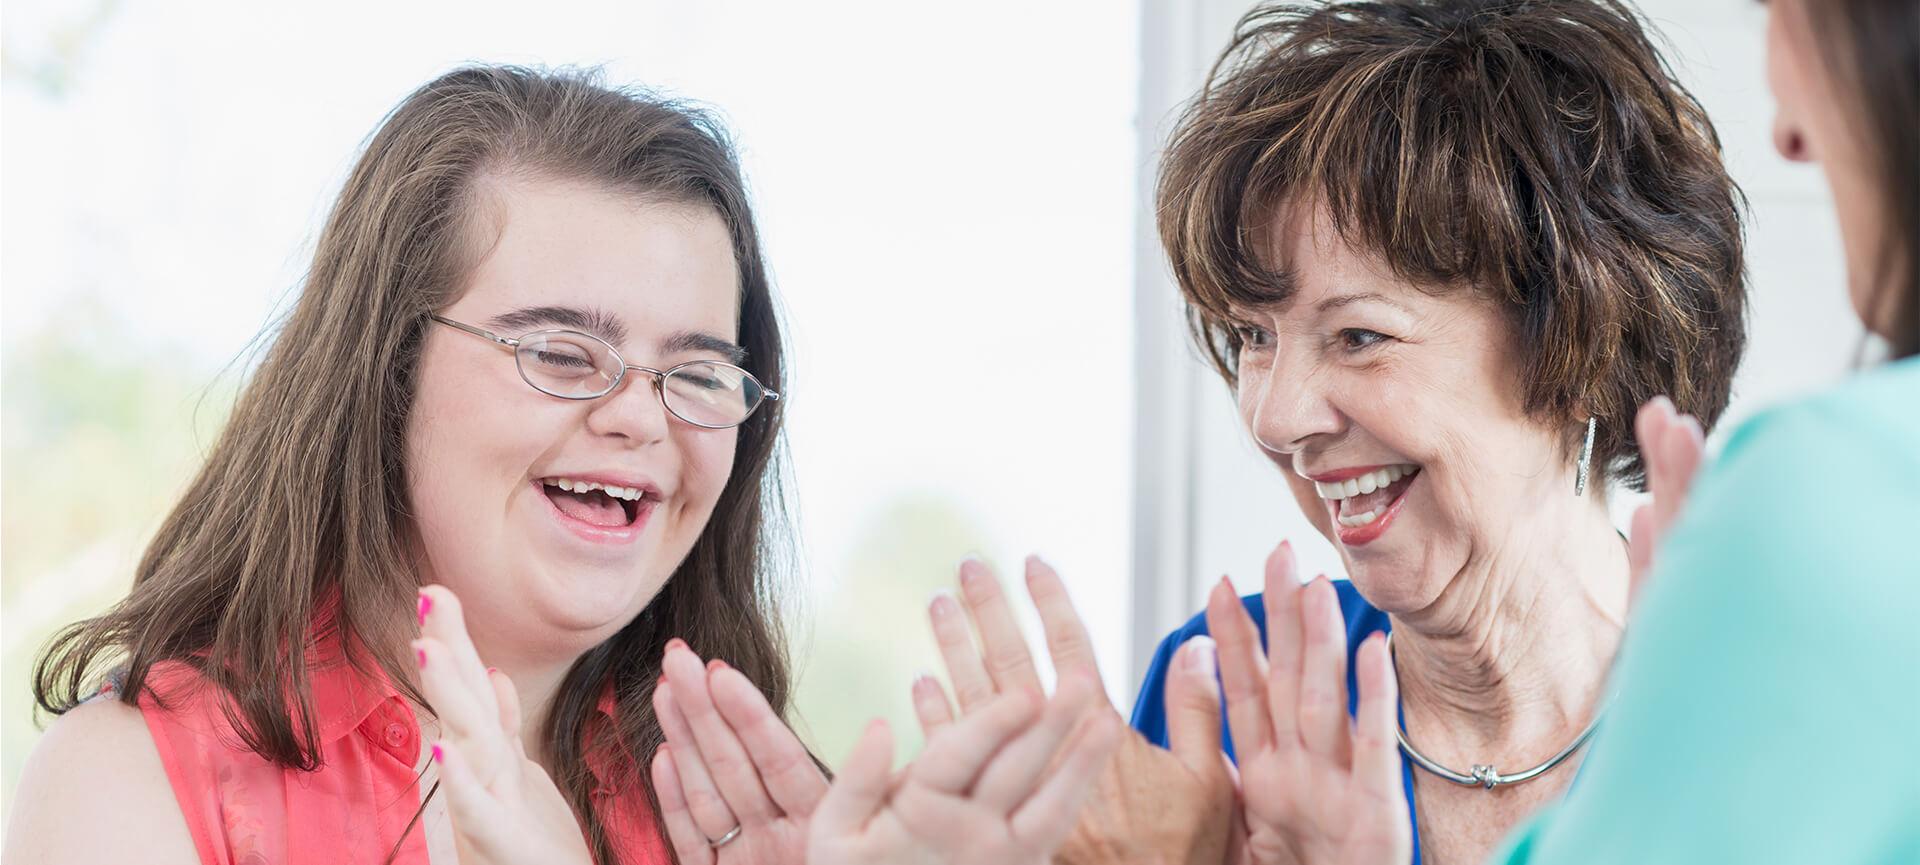 Down syndrome girl and woman smiling